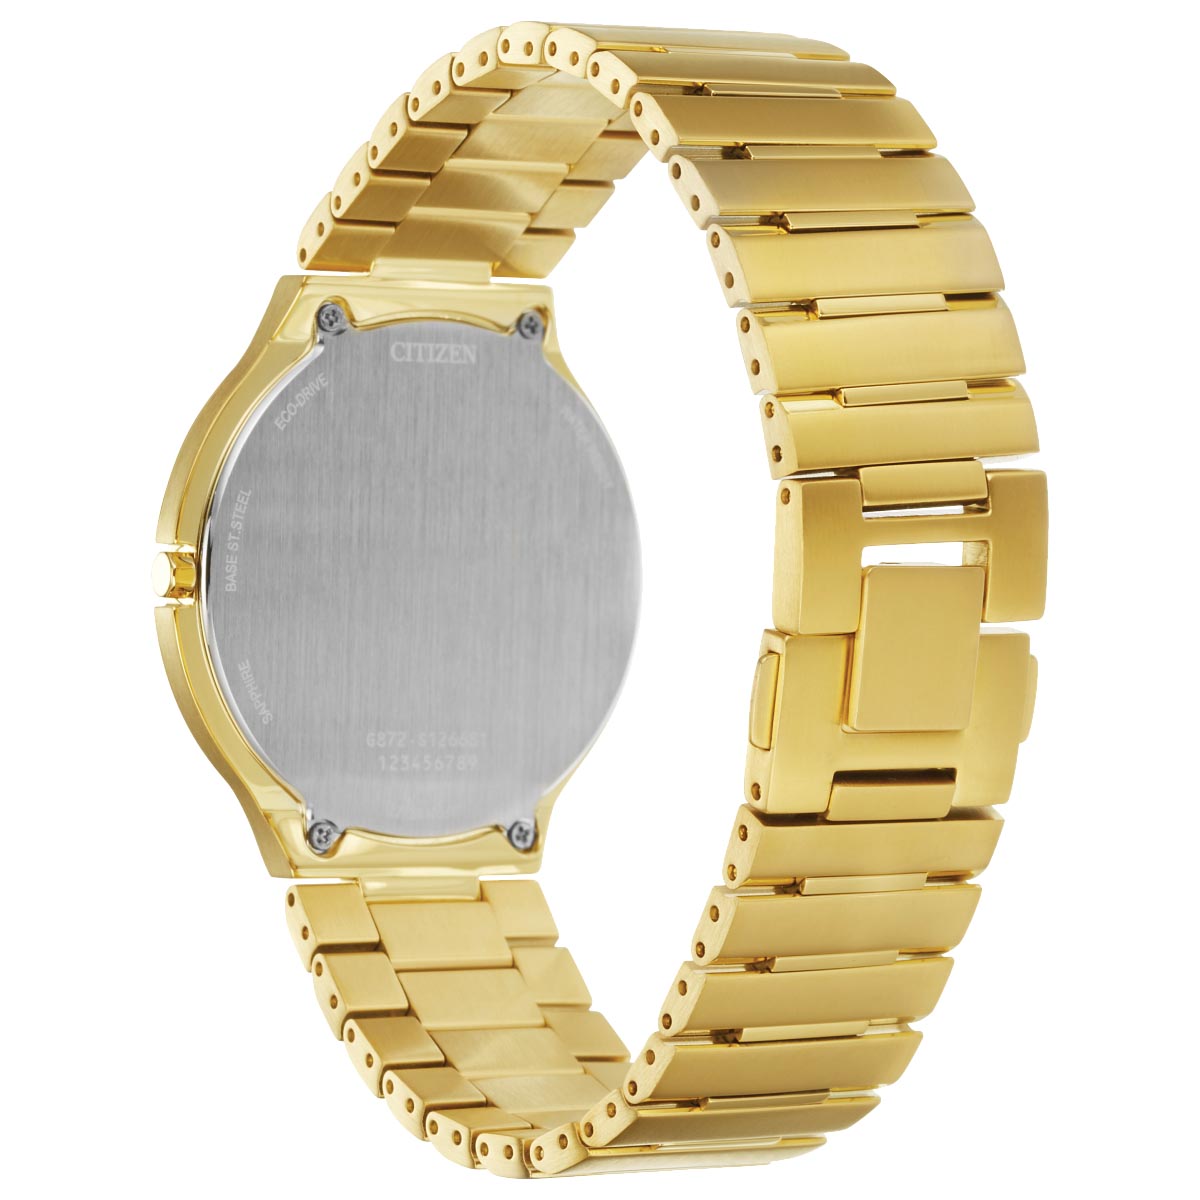 Citizen Stiletto Mens Watch with Black Dial and Yellow Gold Toned Bracelet (eco drive movement)